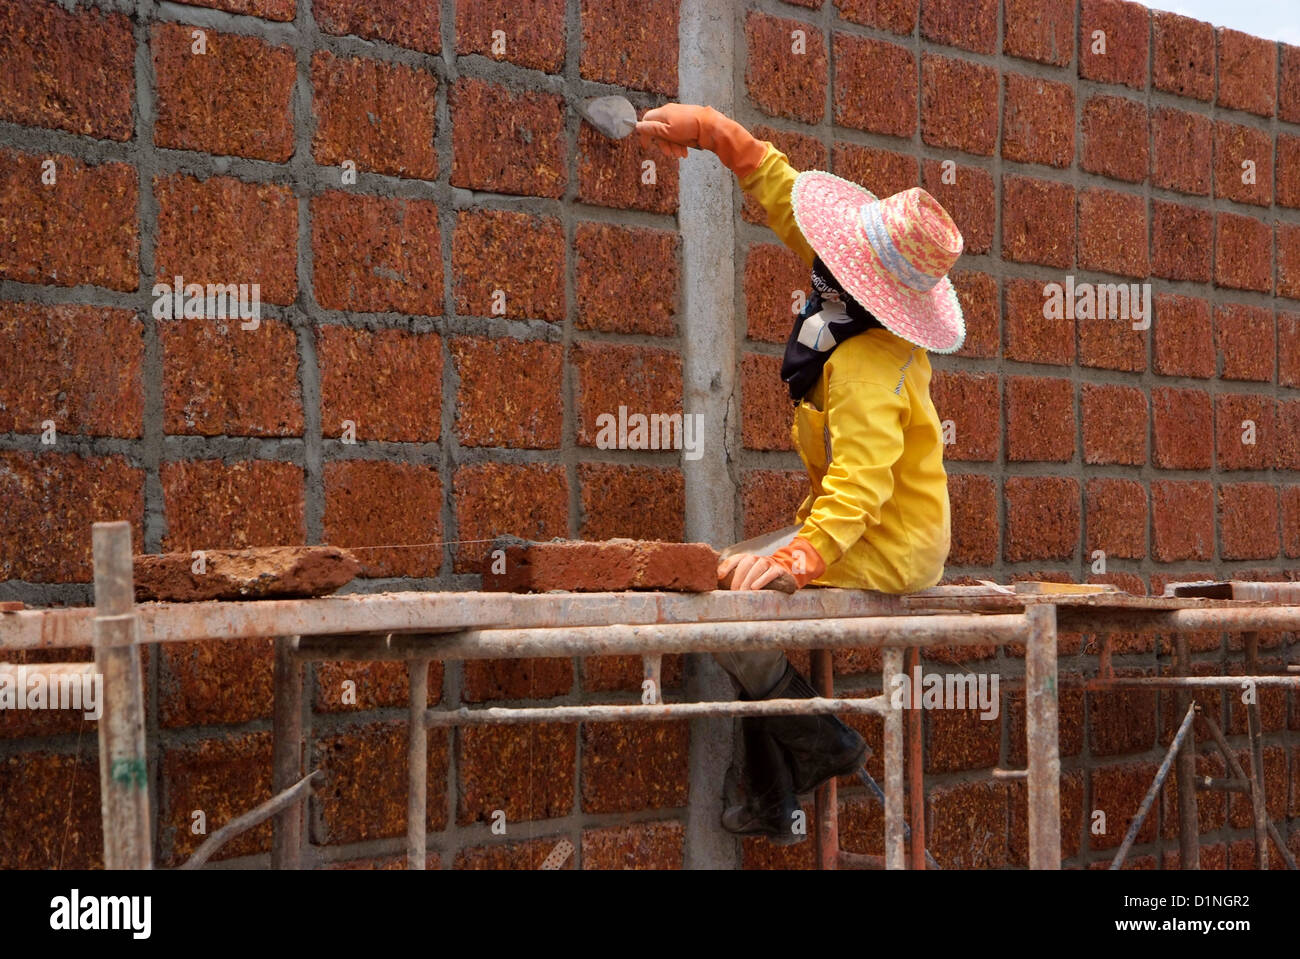 Worker is Constructing large wall with laterite brick. Stock Photo